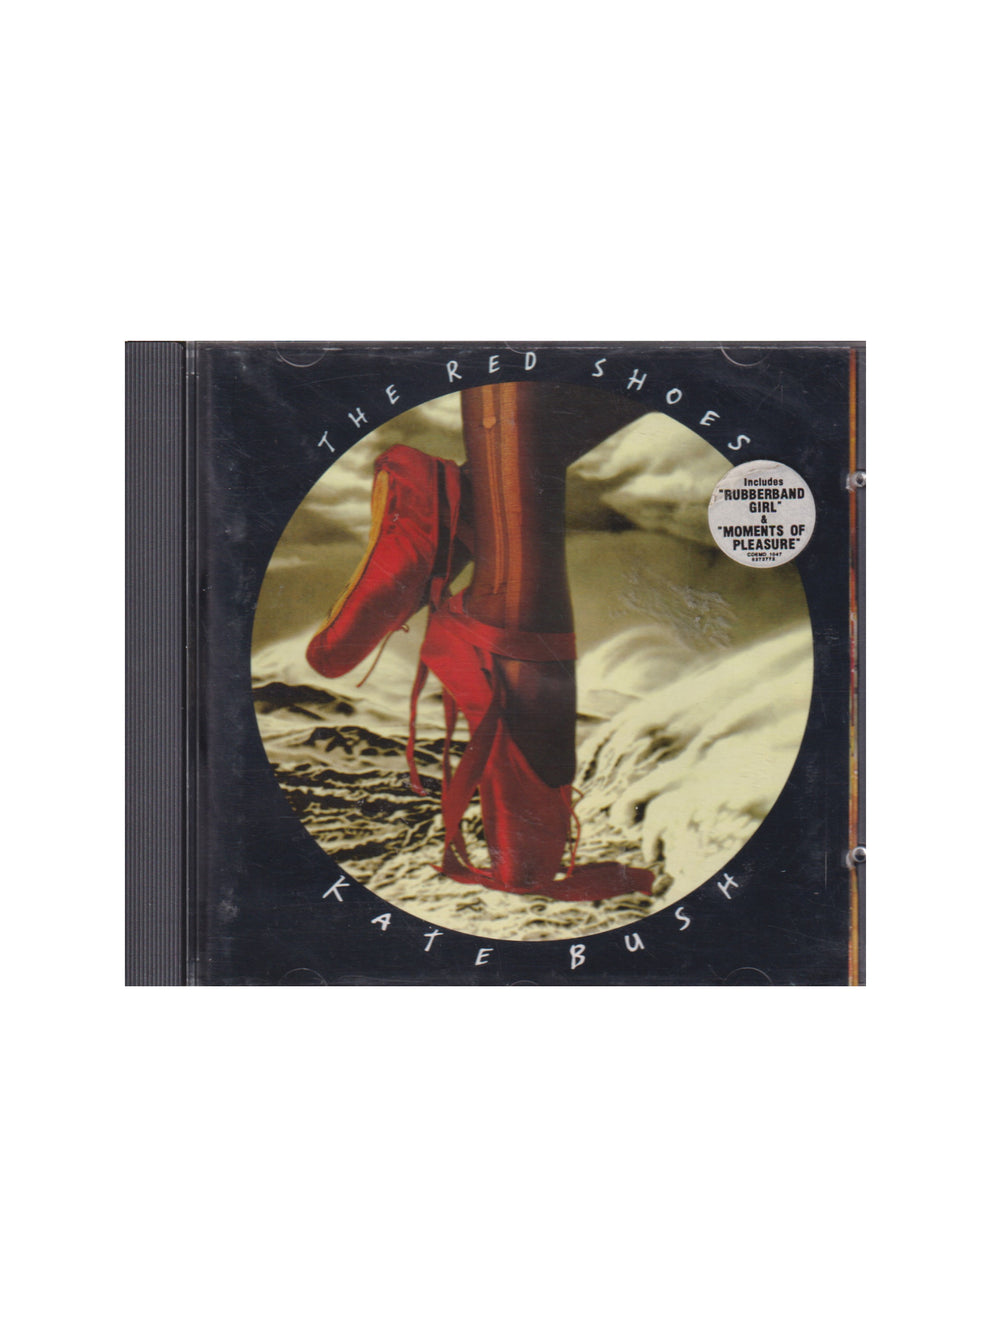 Prince – Kate Bush – The Red Shoes CD Album Europe Poster Sleeve Released: 1993